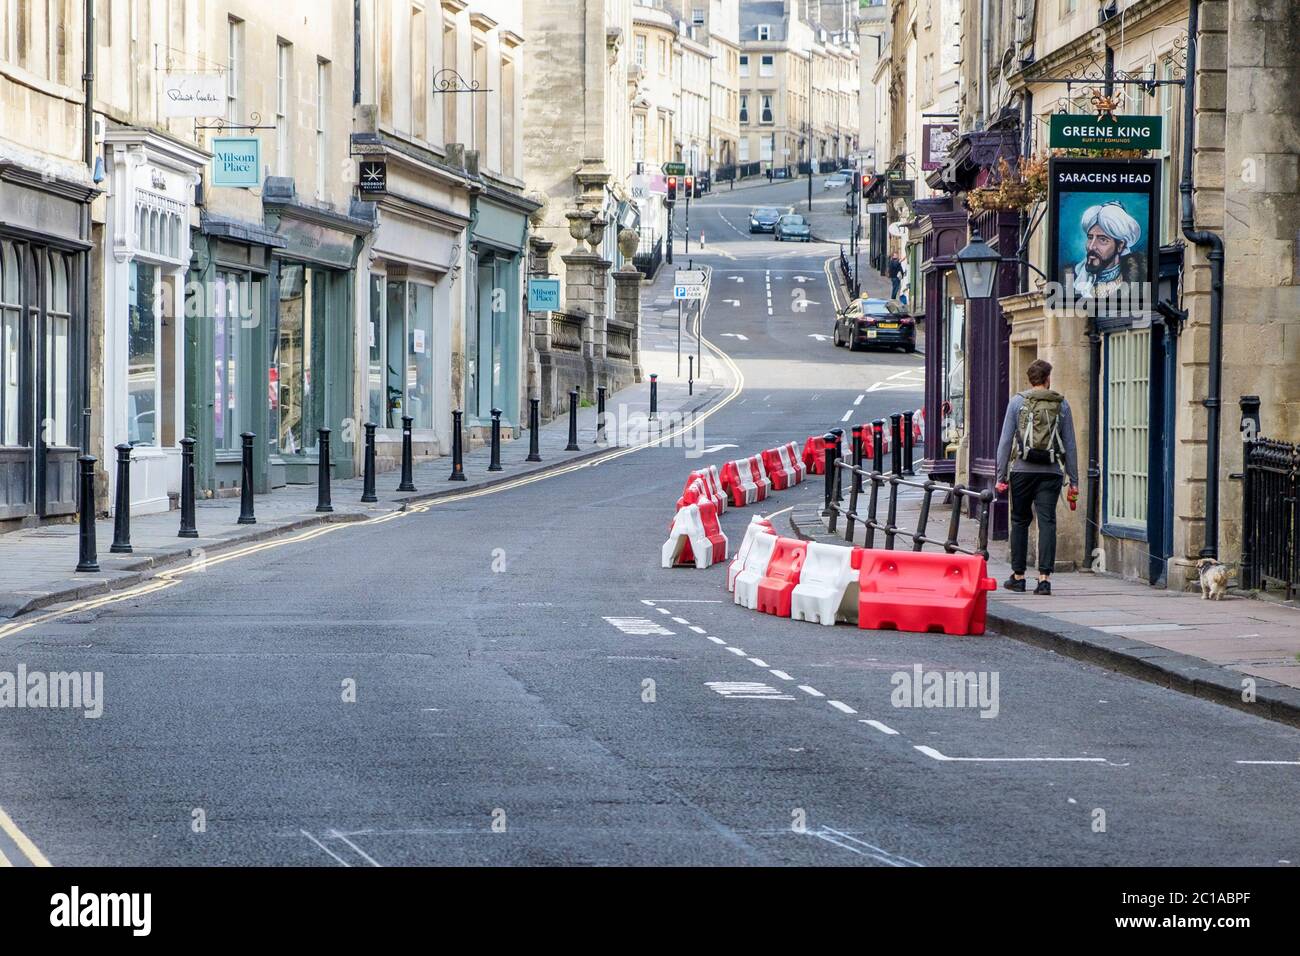 Bath, UK. 15th June, 2020. As non essential shops in England are given the green light by the government to reopen, street barriers put in place by the local council to widen the pavements in order to help with social distancing are pictured in Broad street. Credit: Lynchpics/Alamy Live News Stock Photo